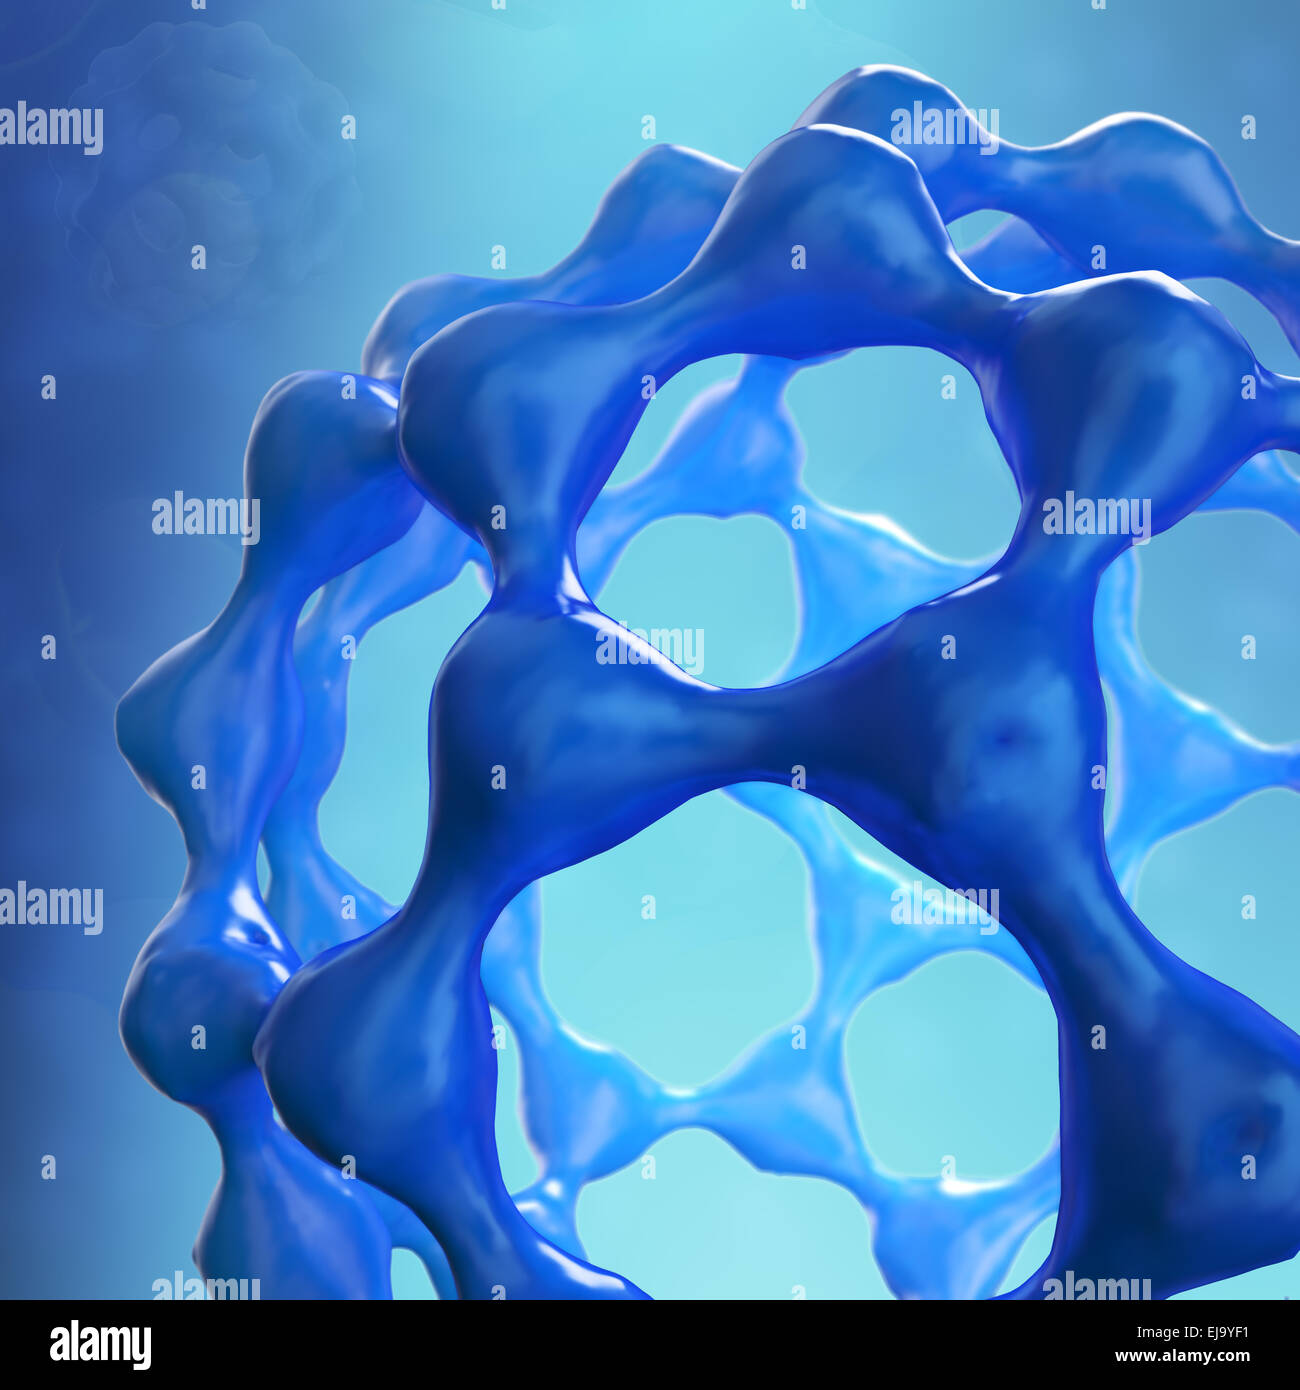 3D model abstract of a fullerene molecule Stock Photo